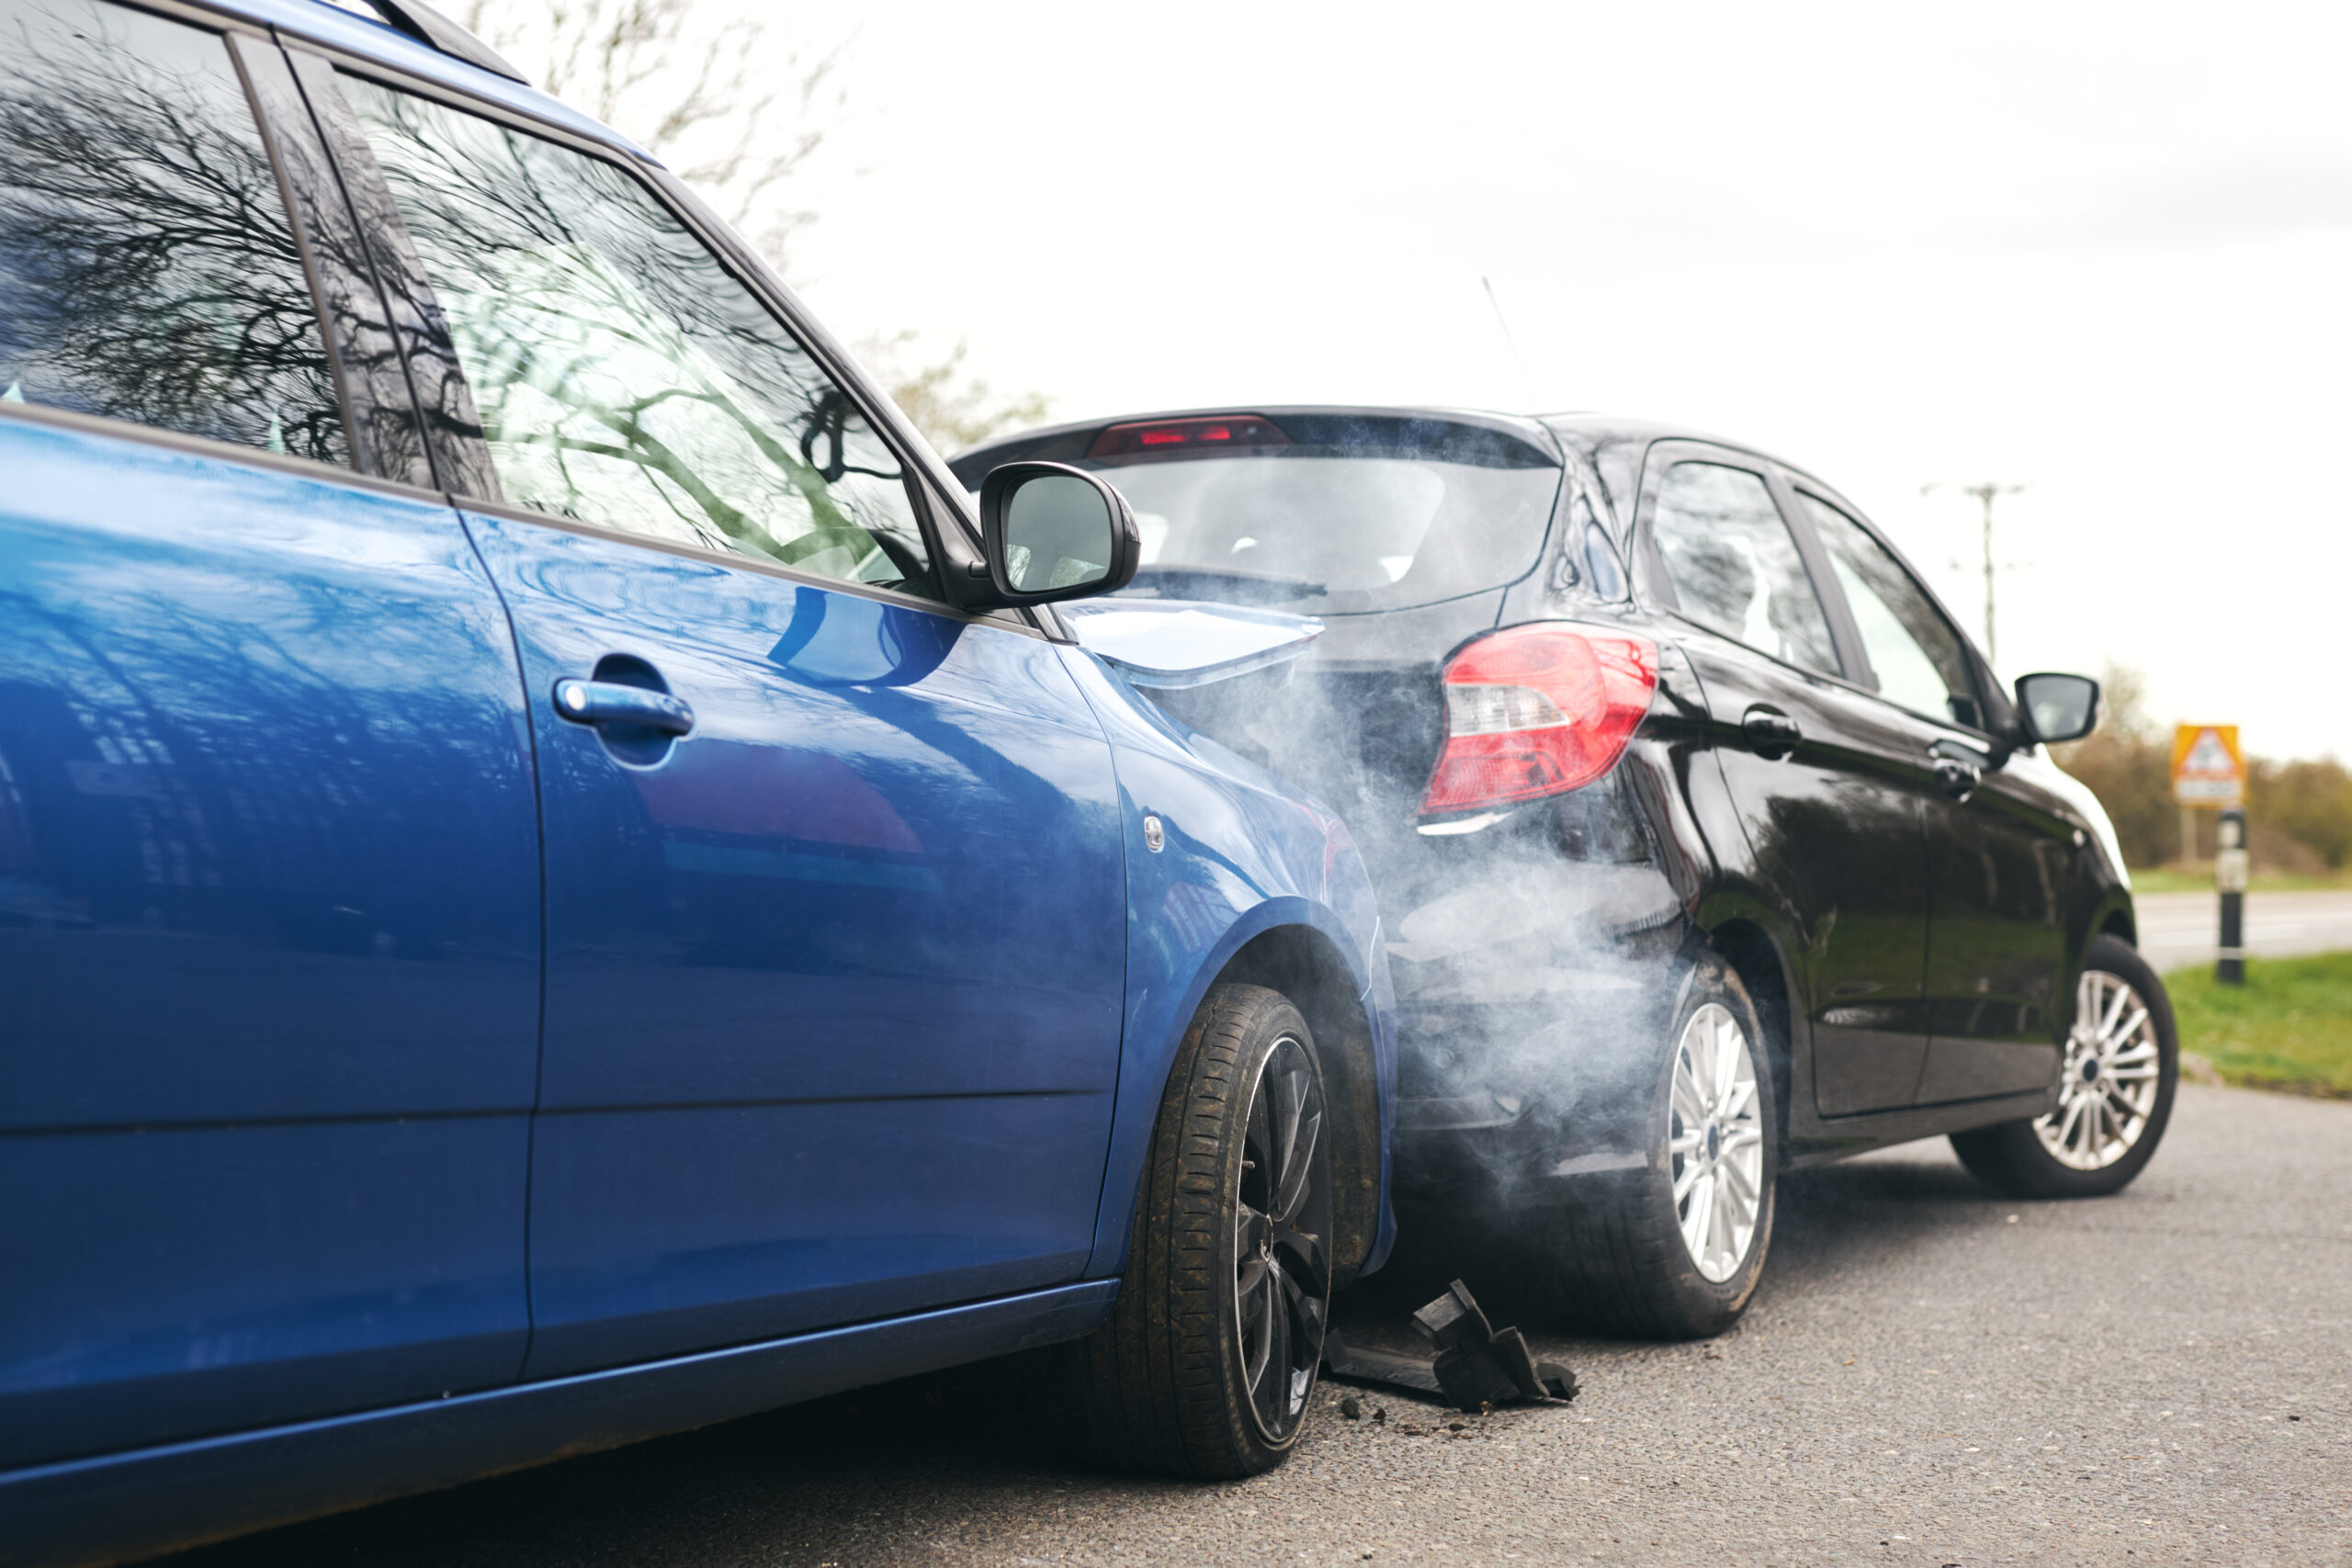 Read more about the article Collision Services at JD’s Auto Repair: Problems That Can Occur after a Rear End Collision